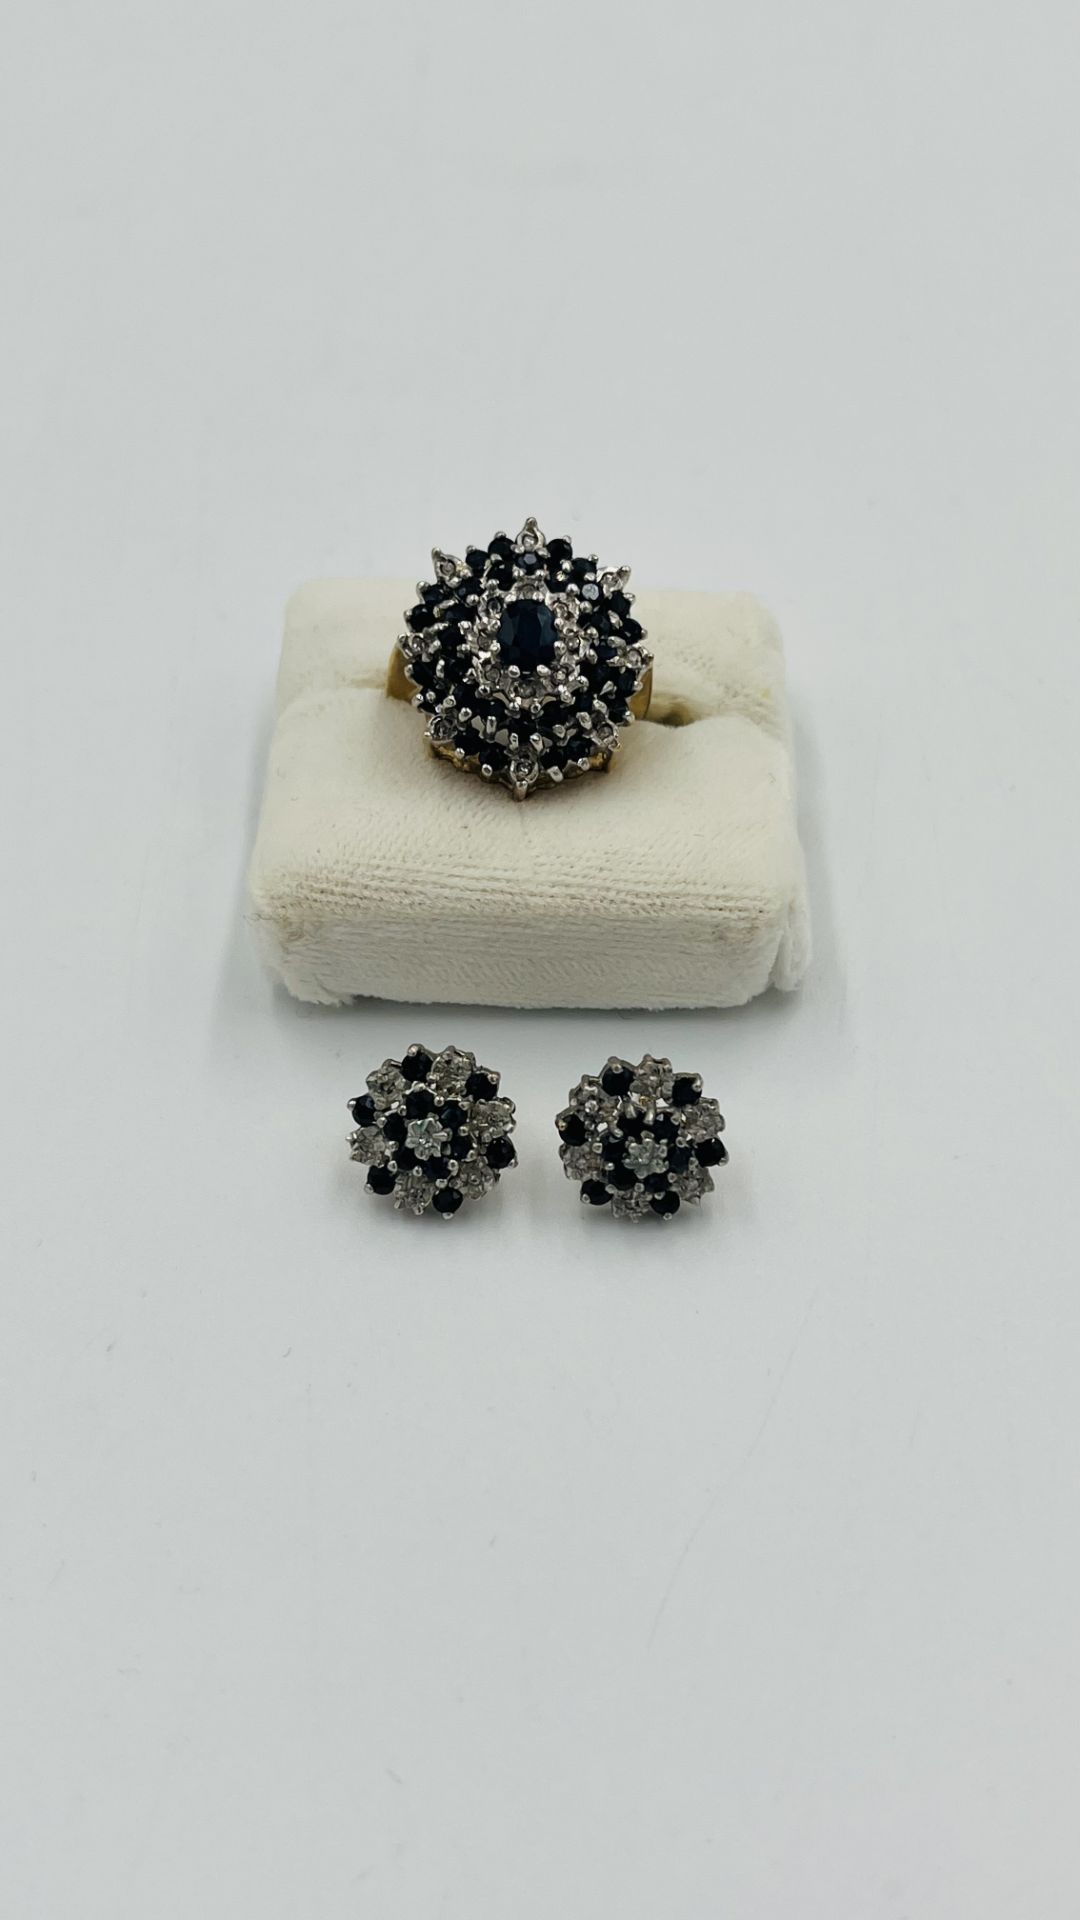 9ct gold, sapphire and diamond cocktail ring with matching earrings